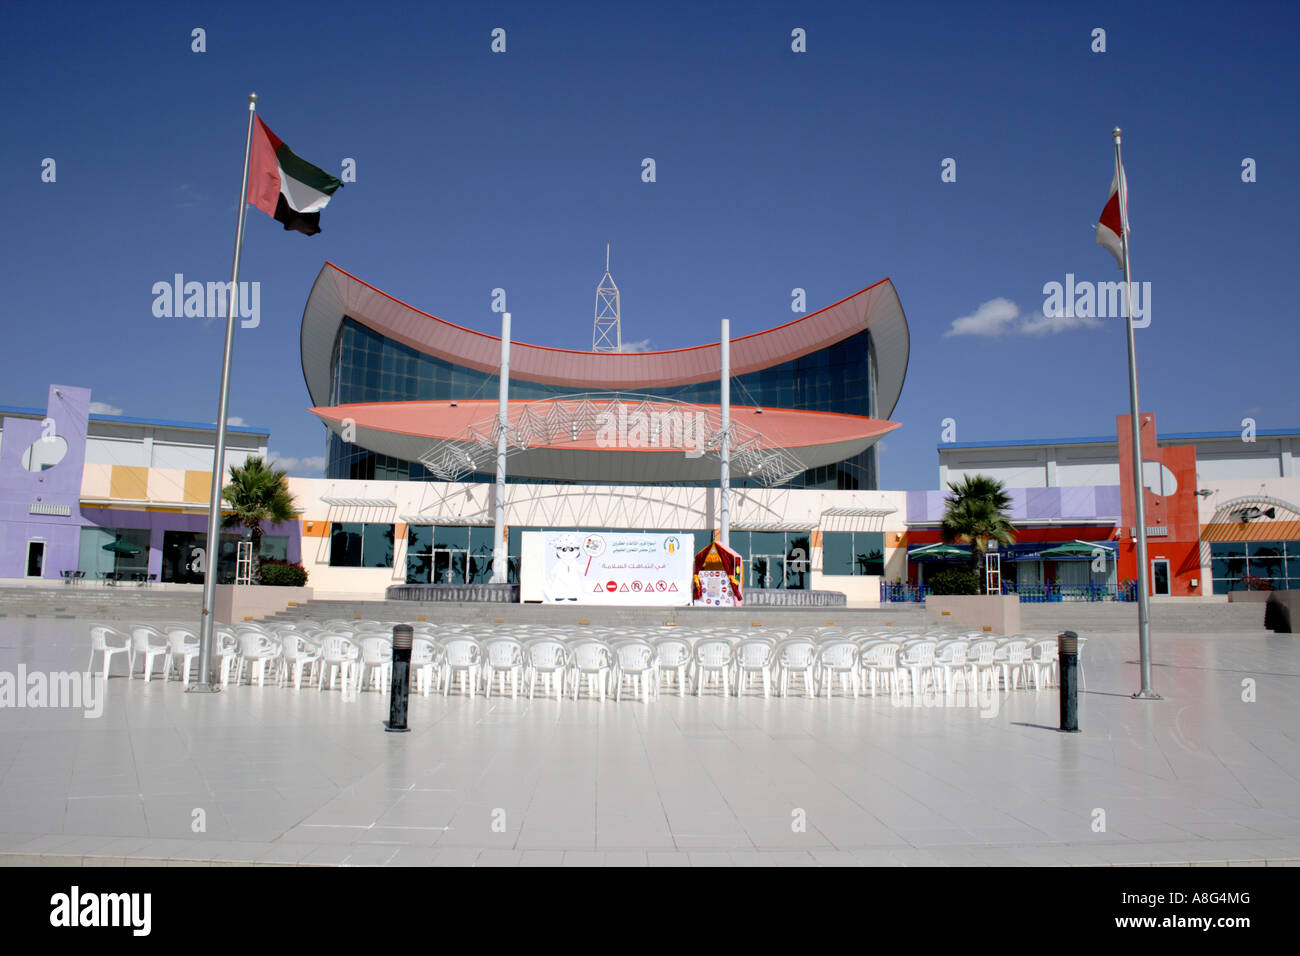 Outside of a Shopping mall in the city of Rash al Khaimah. United Arab Emirates. Photo by Willy Matheisl Stock Photo